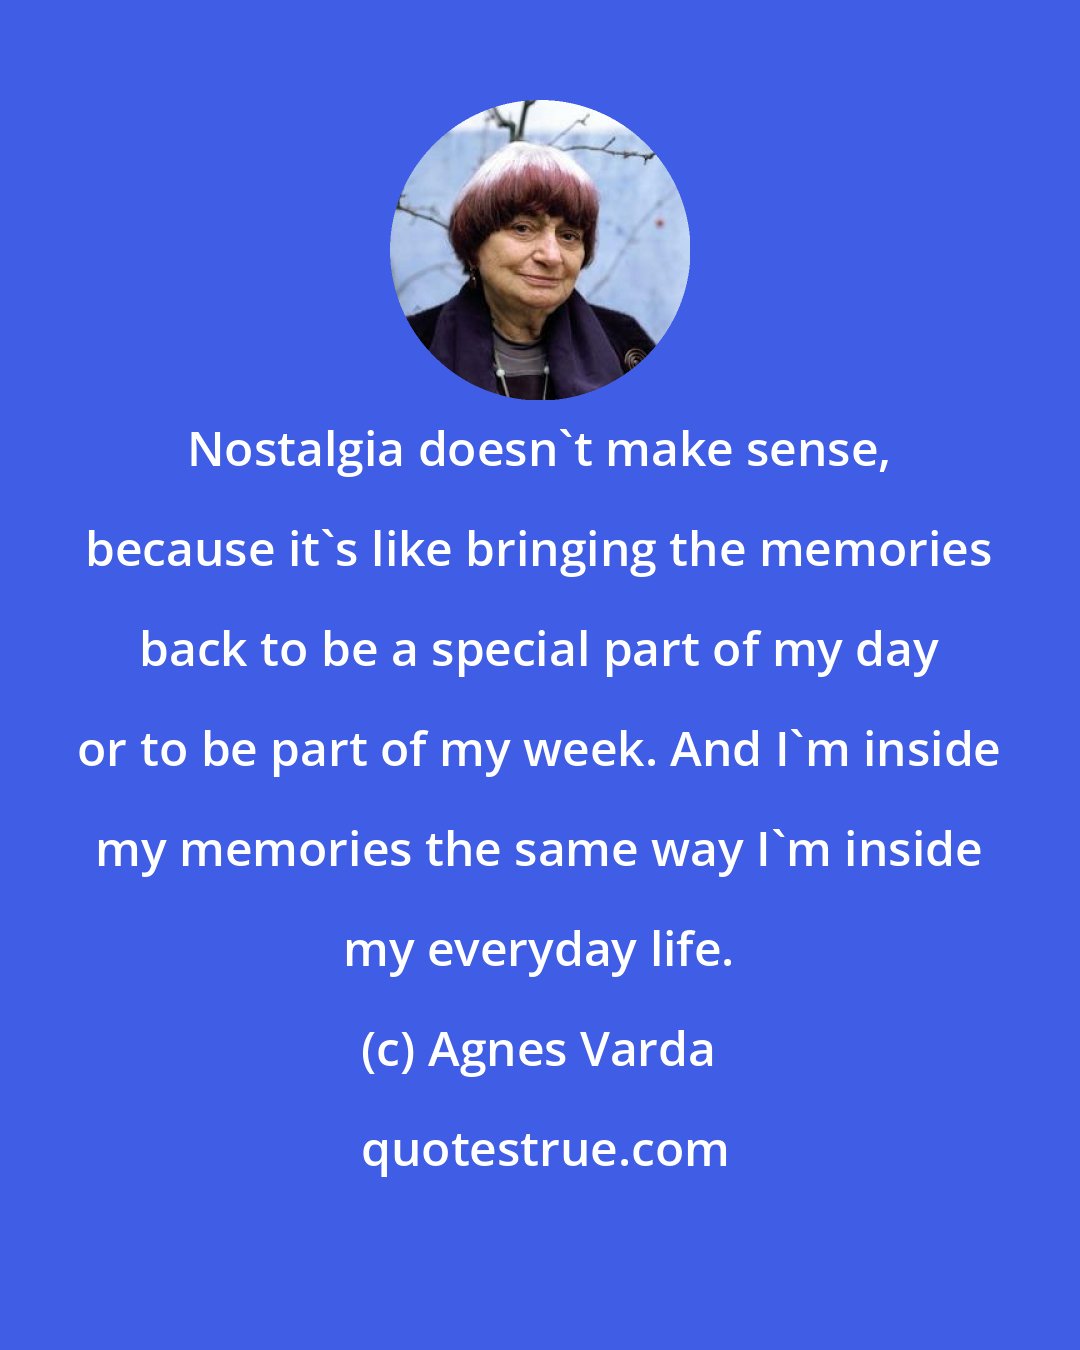 Agnes Varda: Nostalgia doesn't make sense, because it's like bringing the memories back to be a special part of my day or to be part of my week. And I'm inside my memories the same way I'm inside my everyday life.